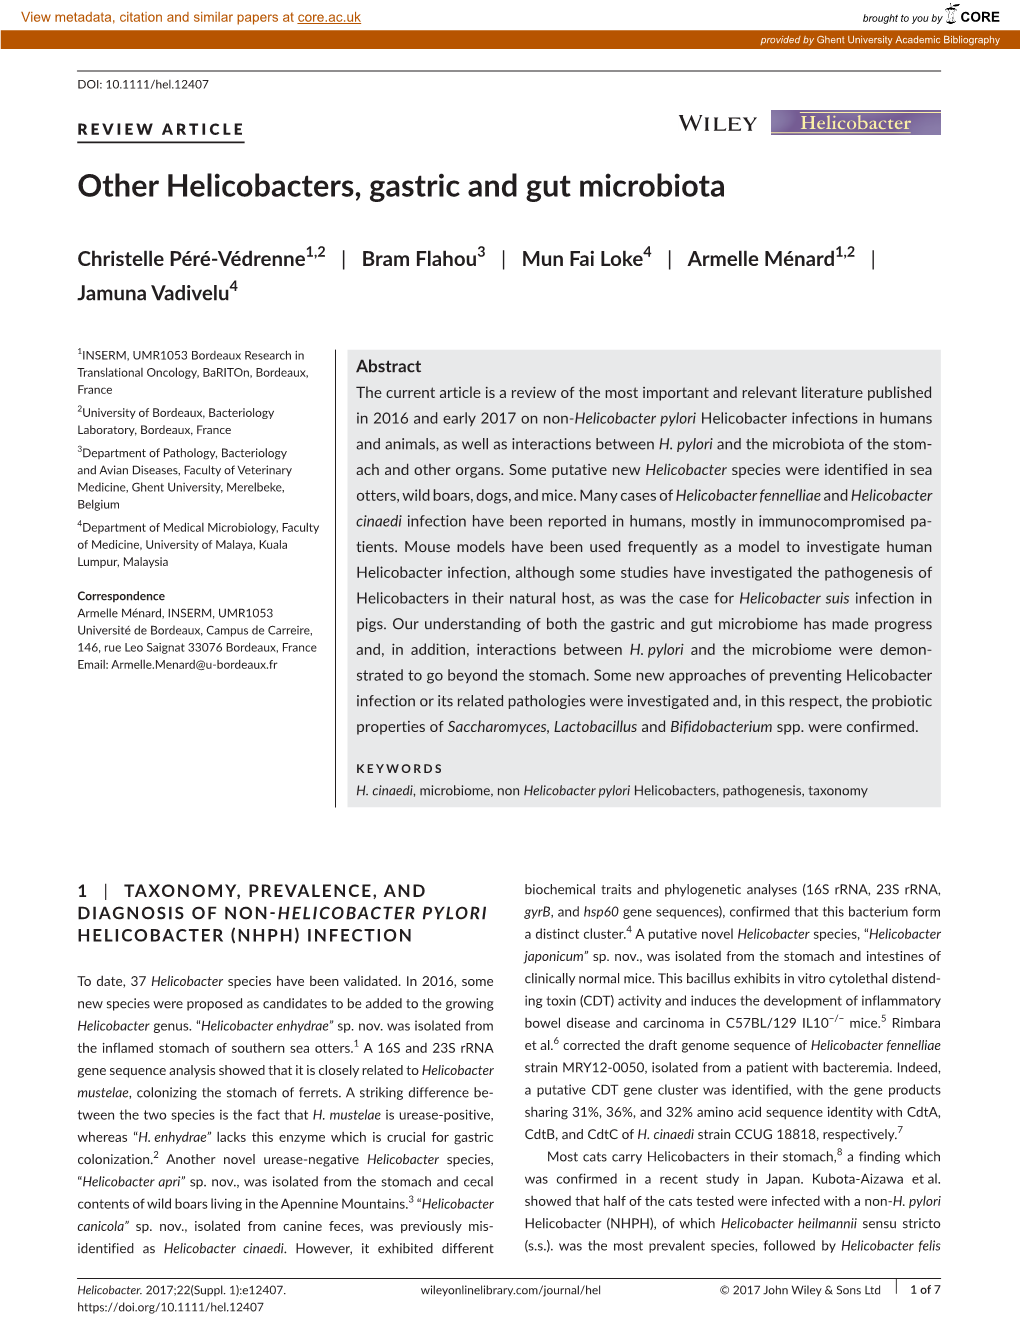 Other Helicobacters, Gastric and Gut Microbiota